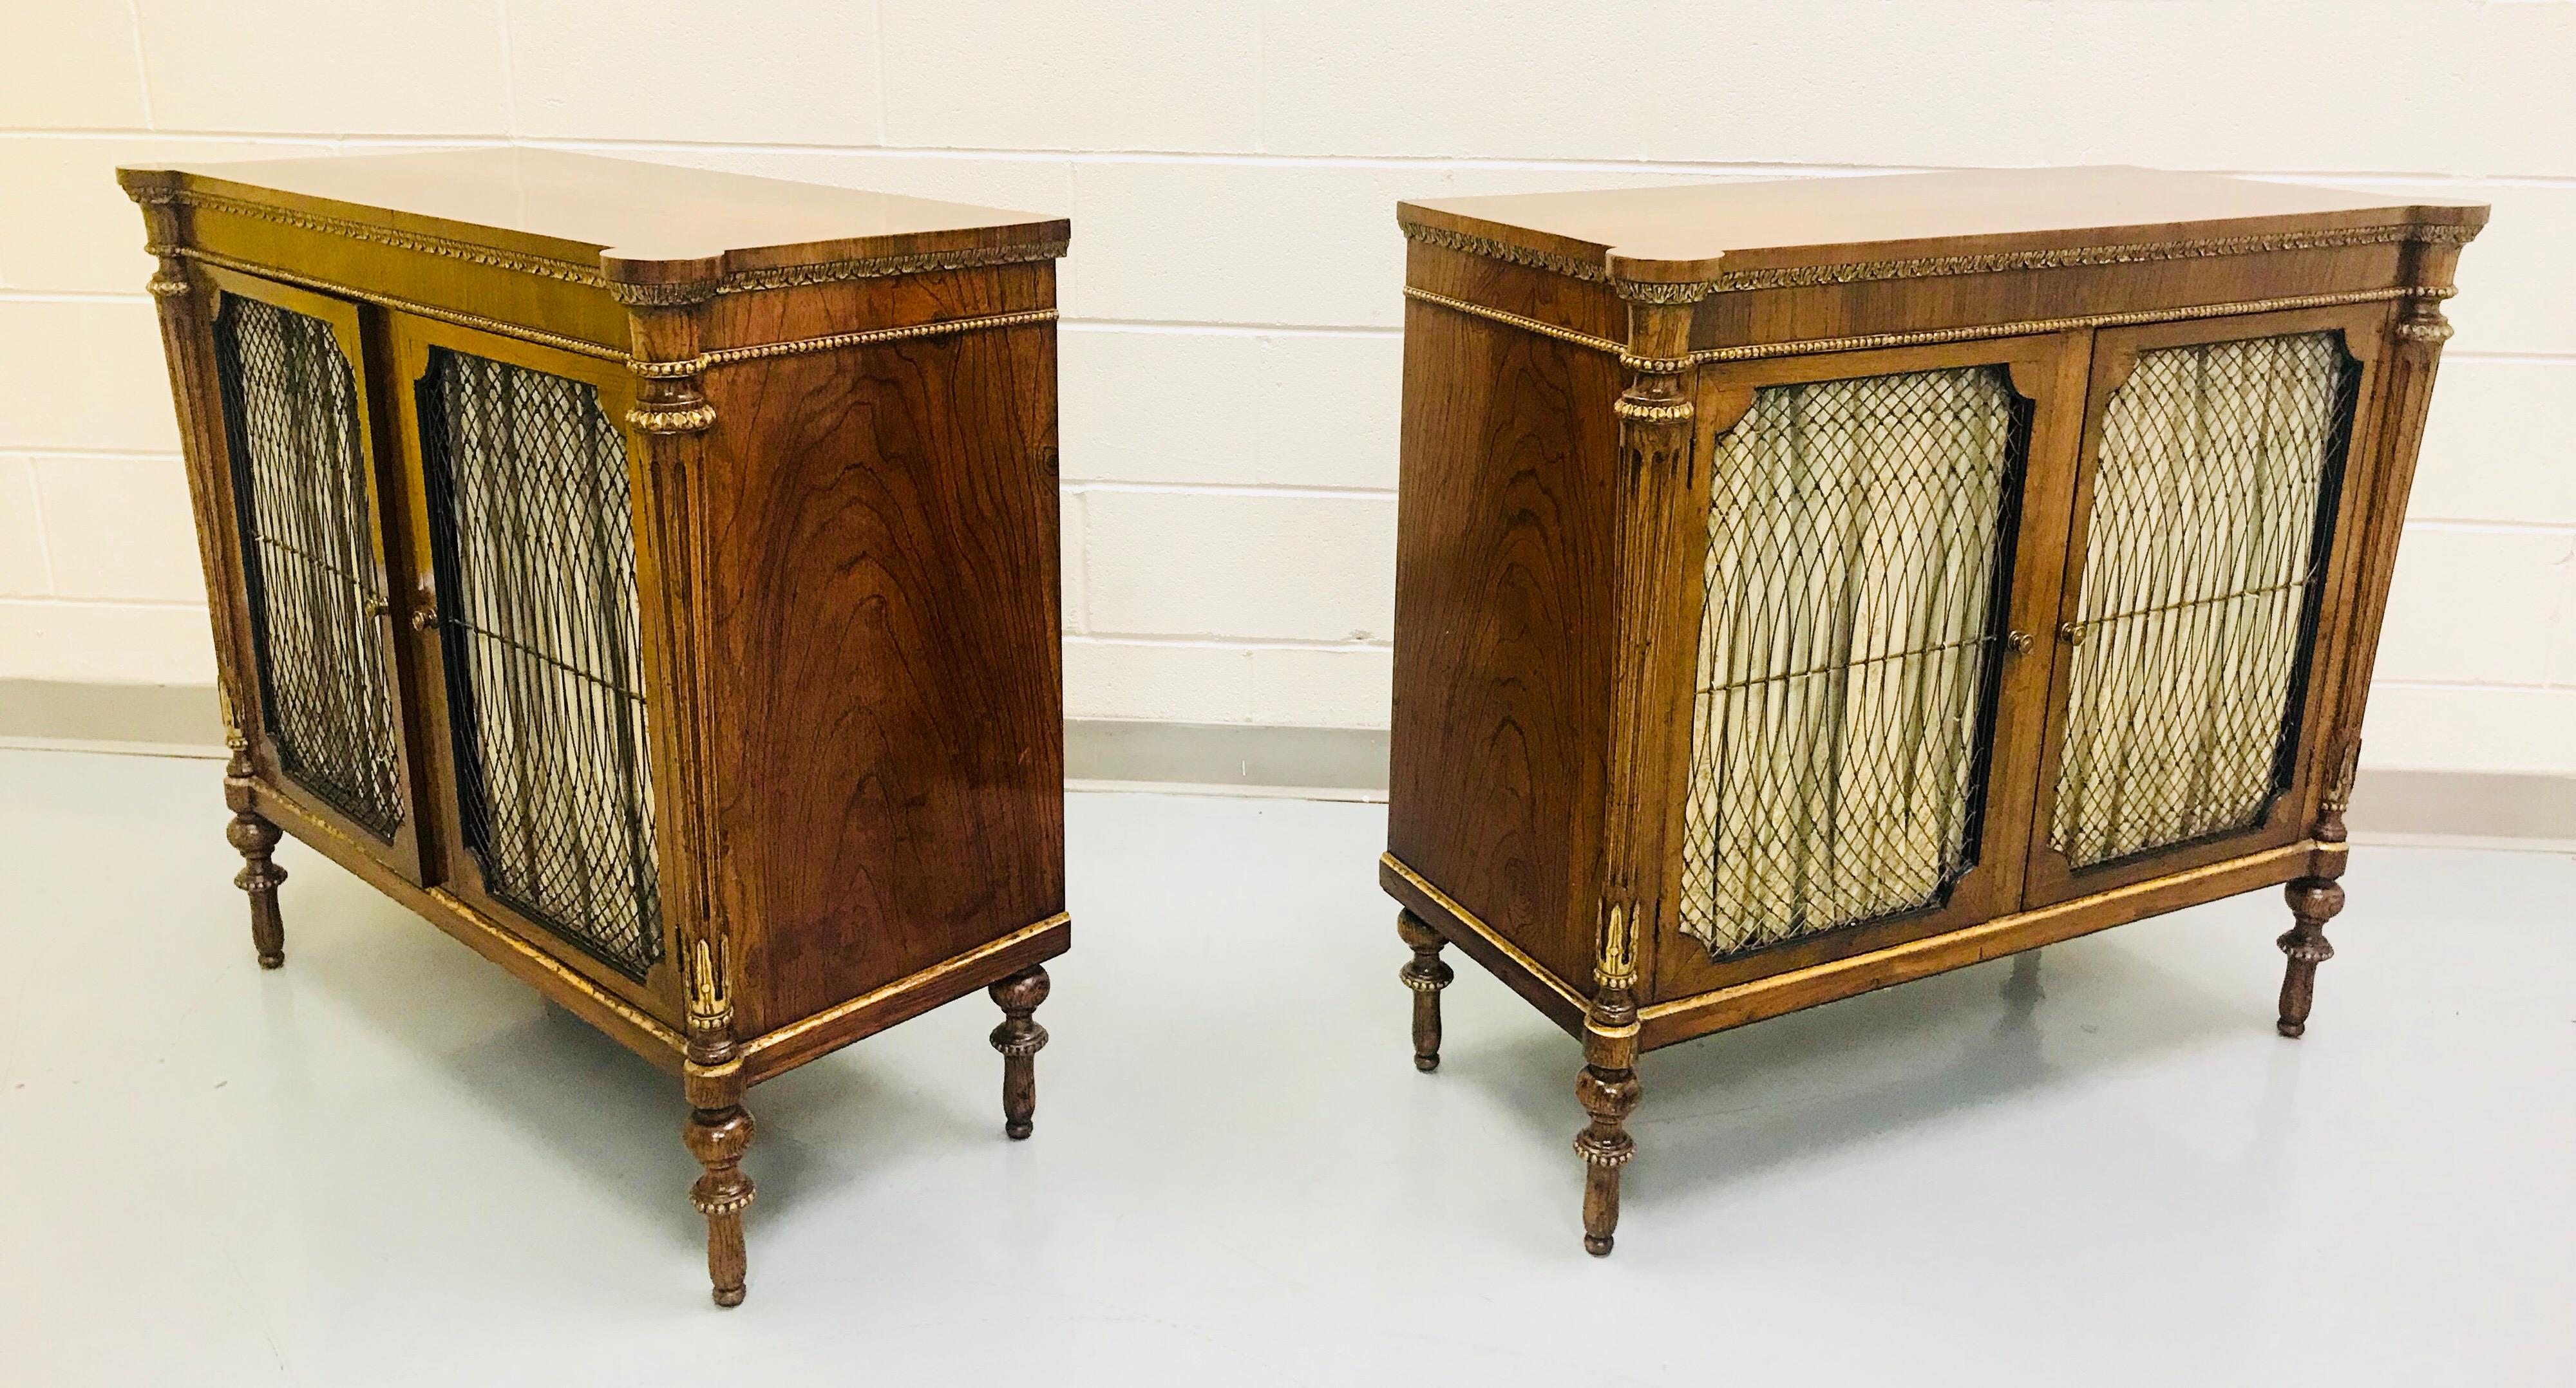 Pair of English Regency Style Rosewood and Parcel-Gilt Cabinets For Sale 6